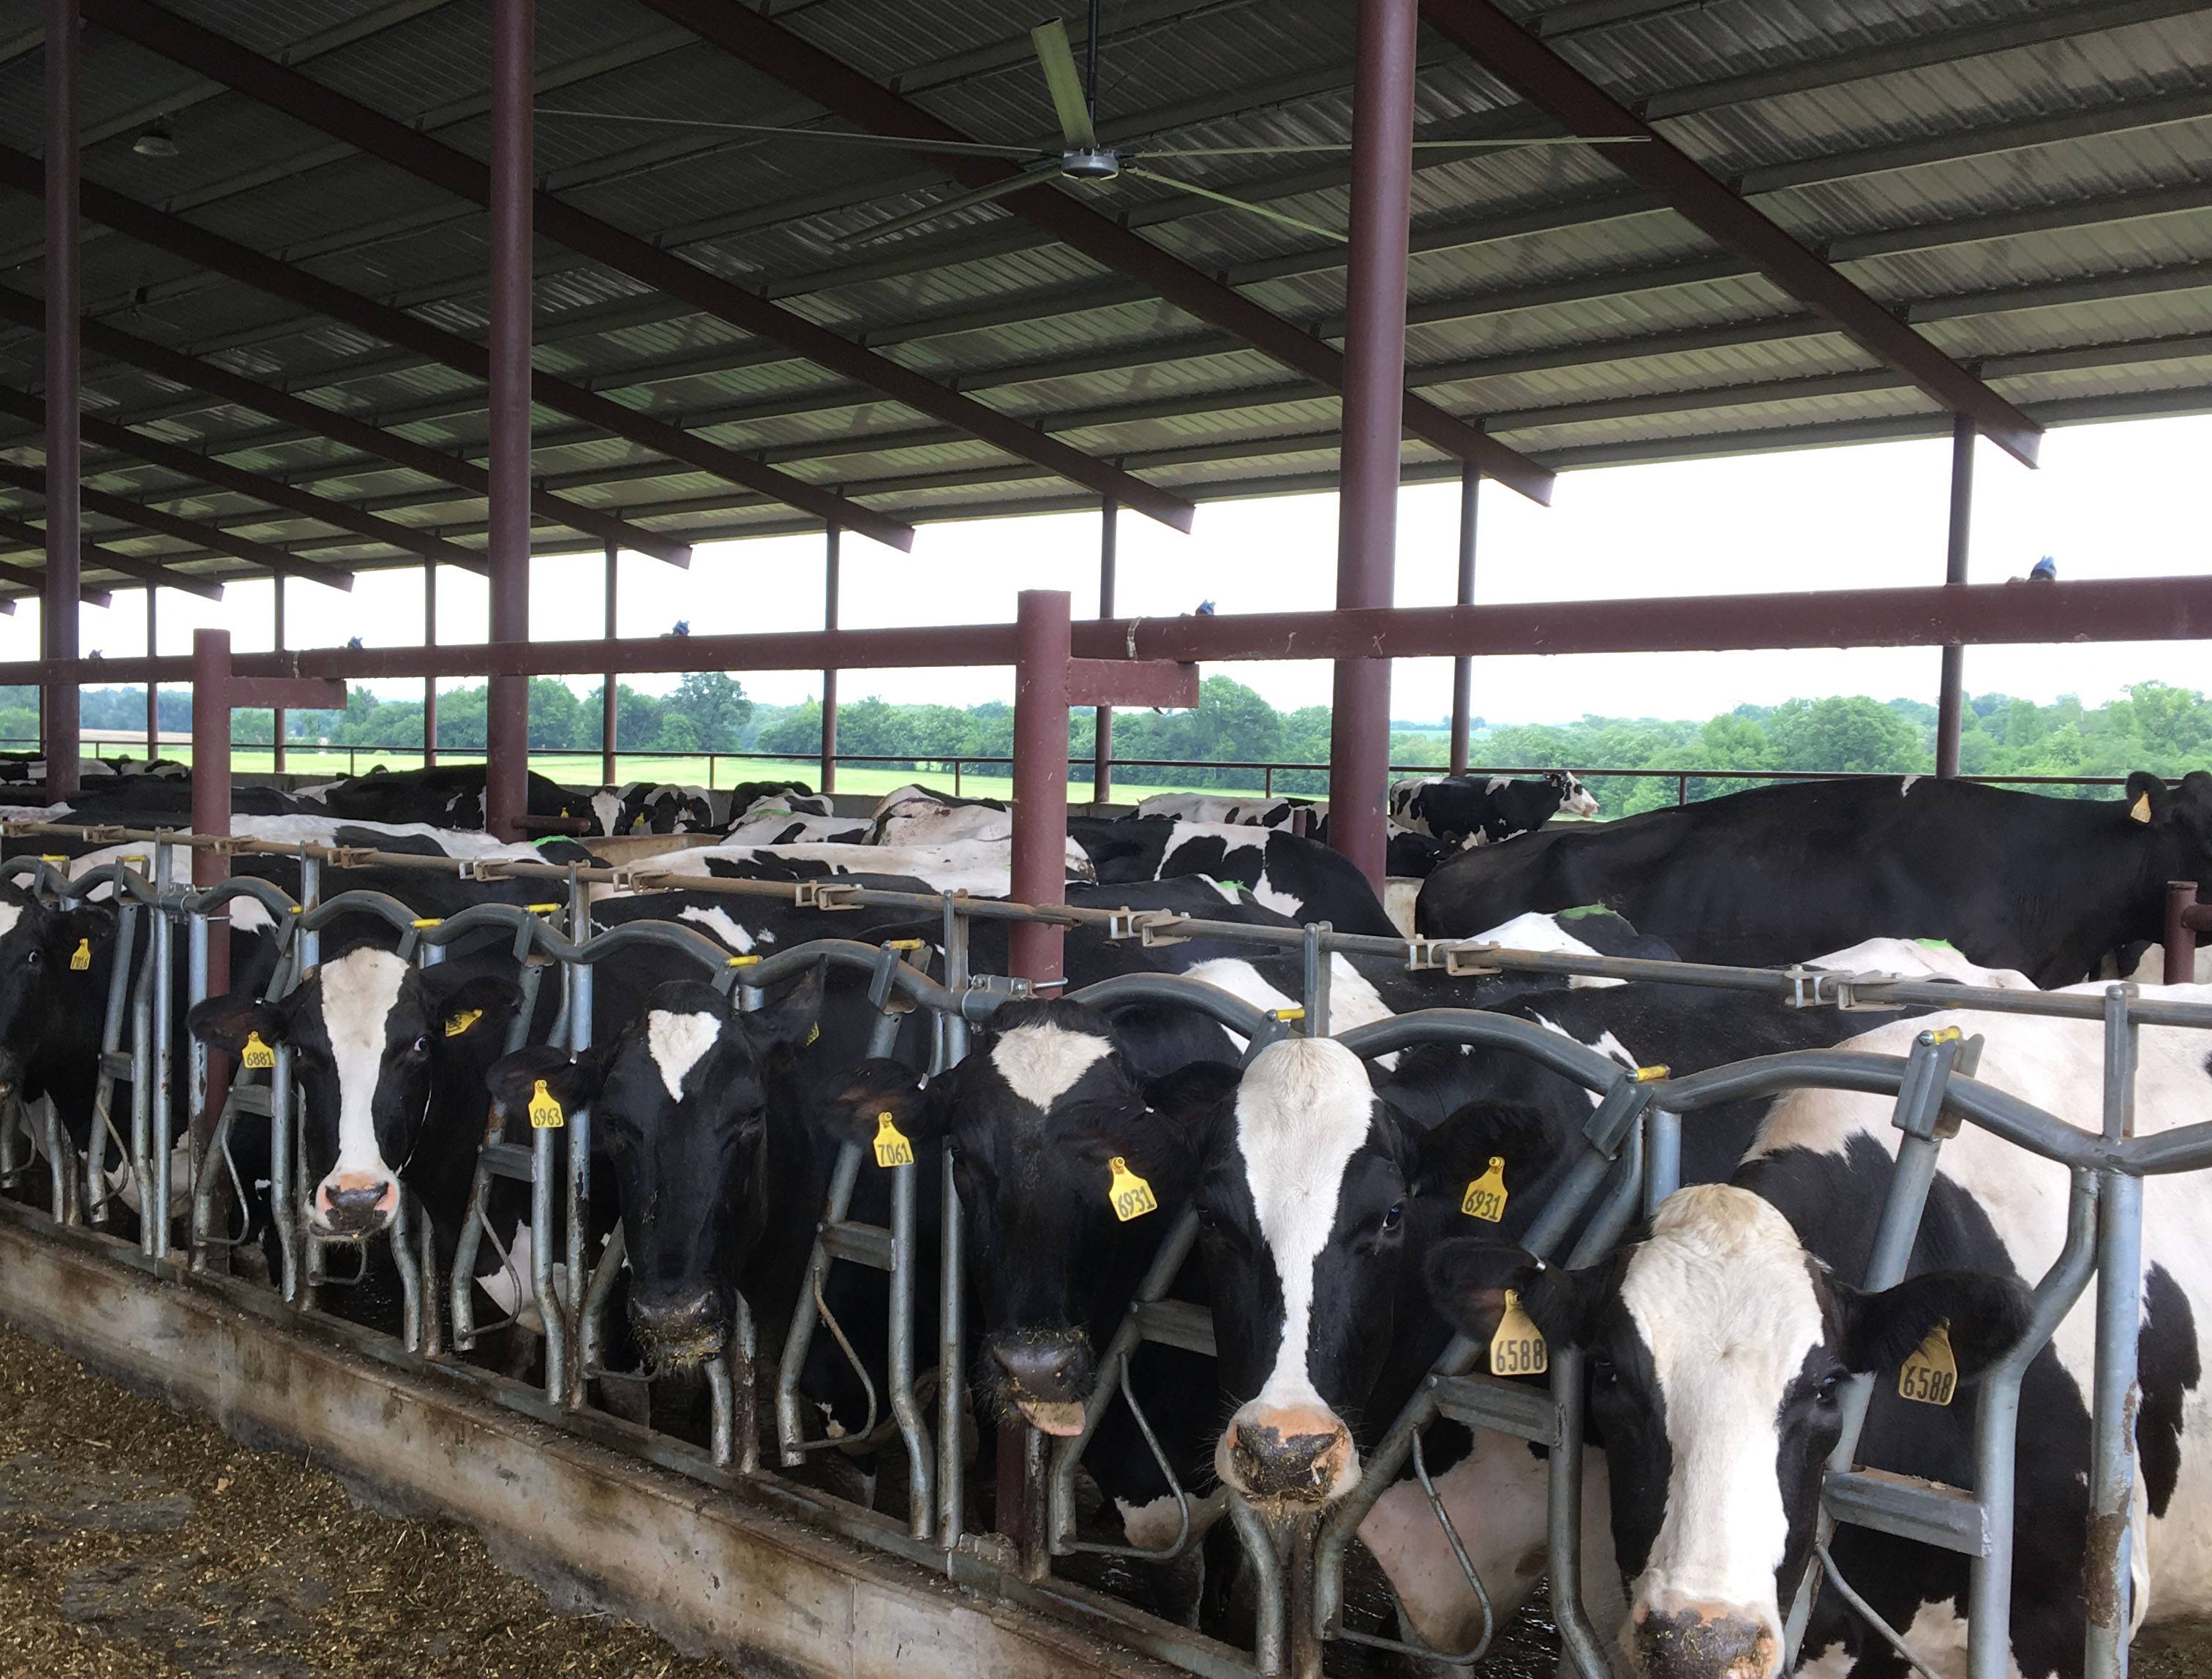 LIvestock fans keeping dairy cows cool